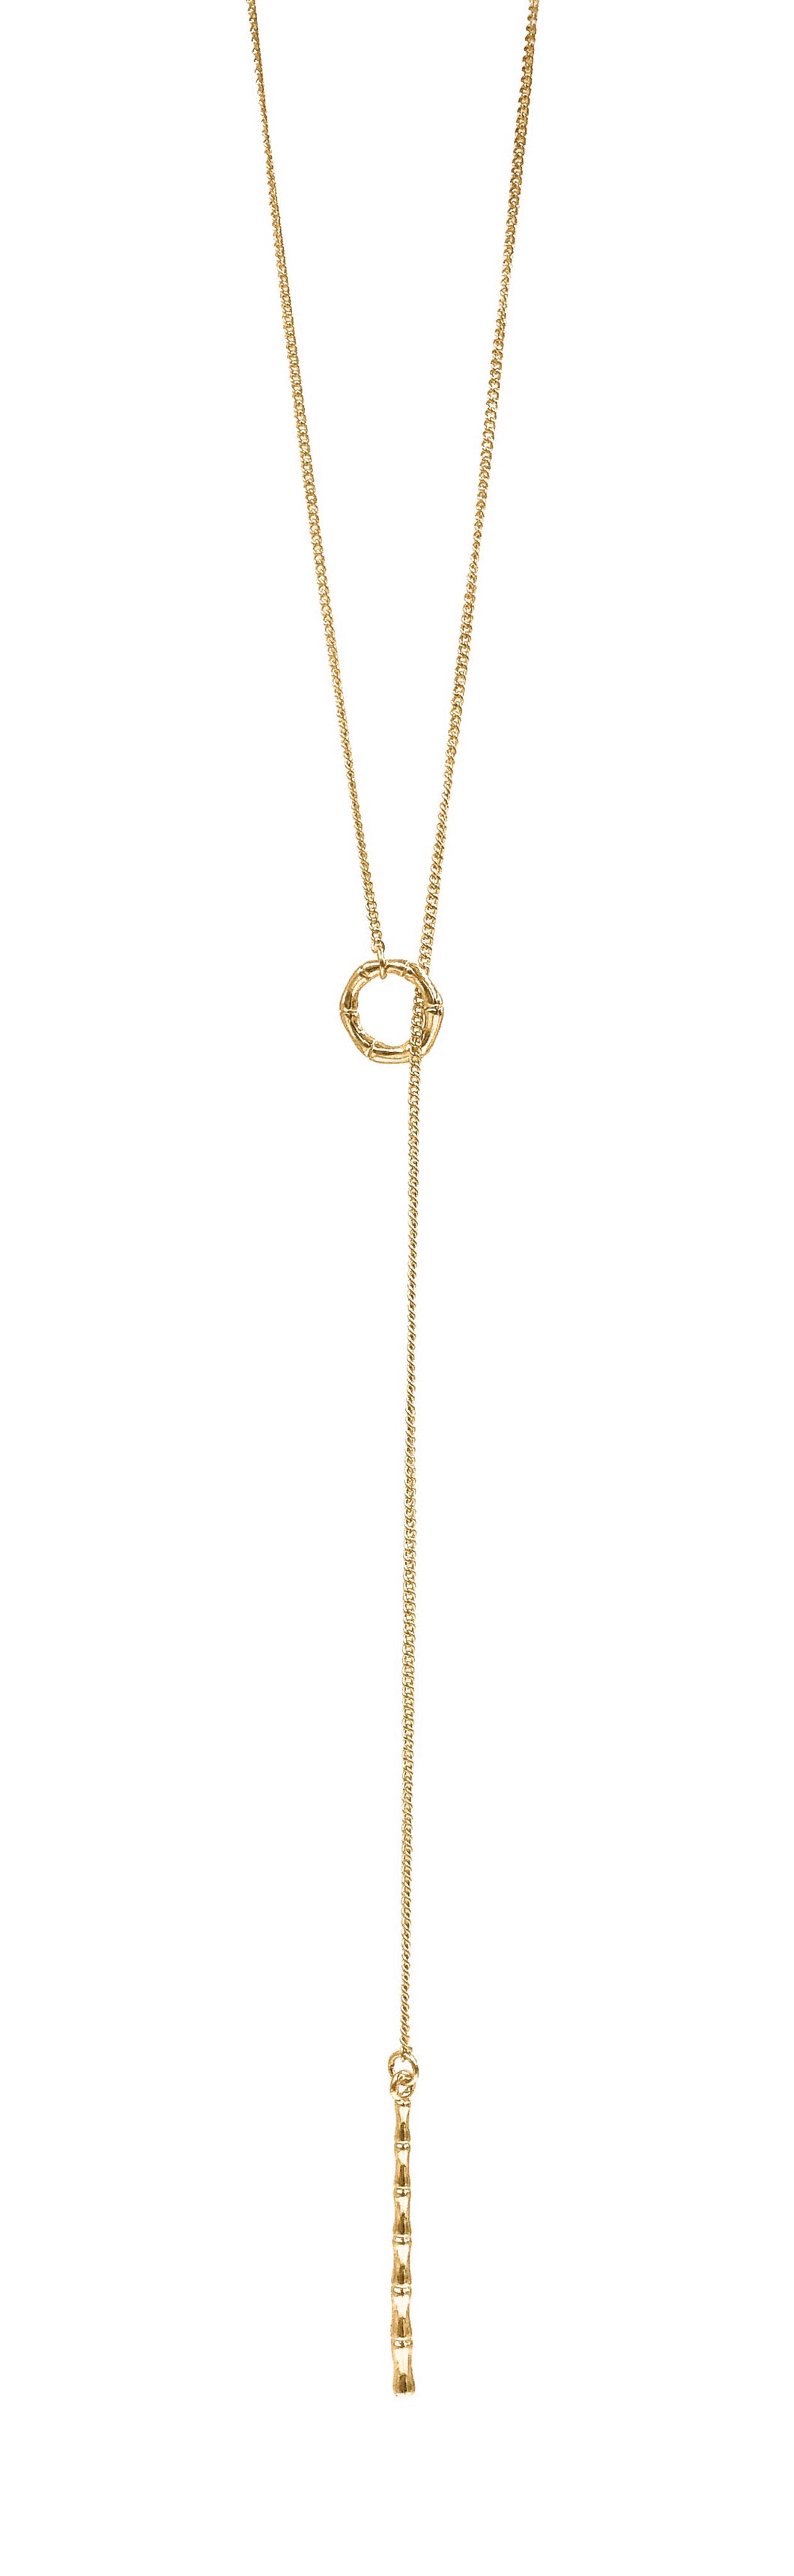 Bamboo inspired lariat everyday necklace